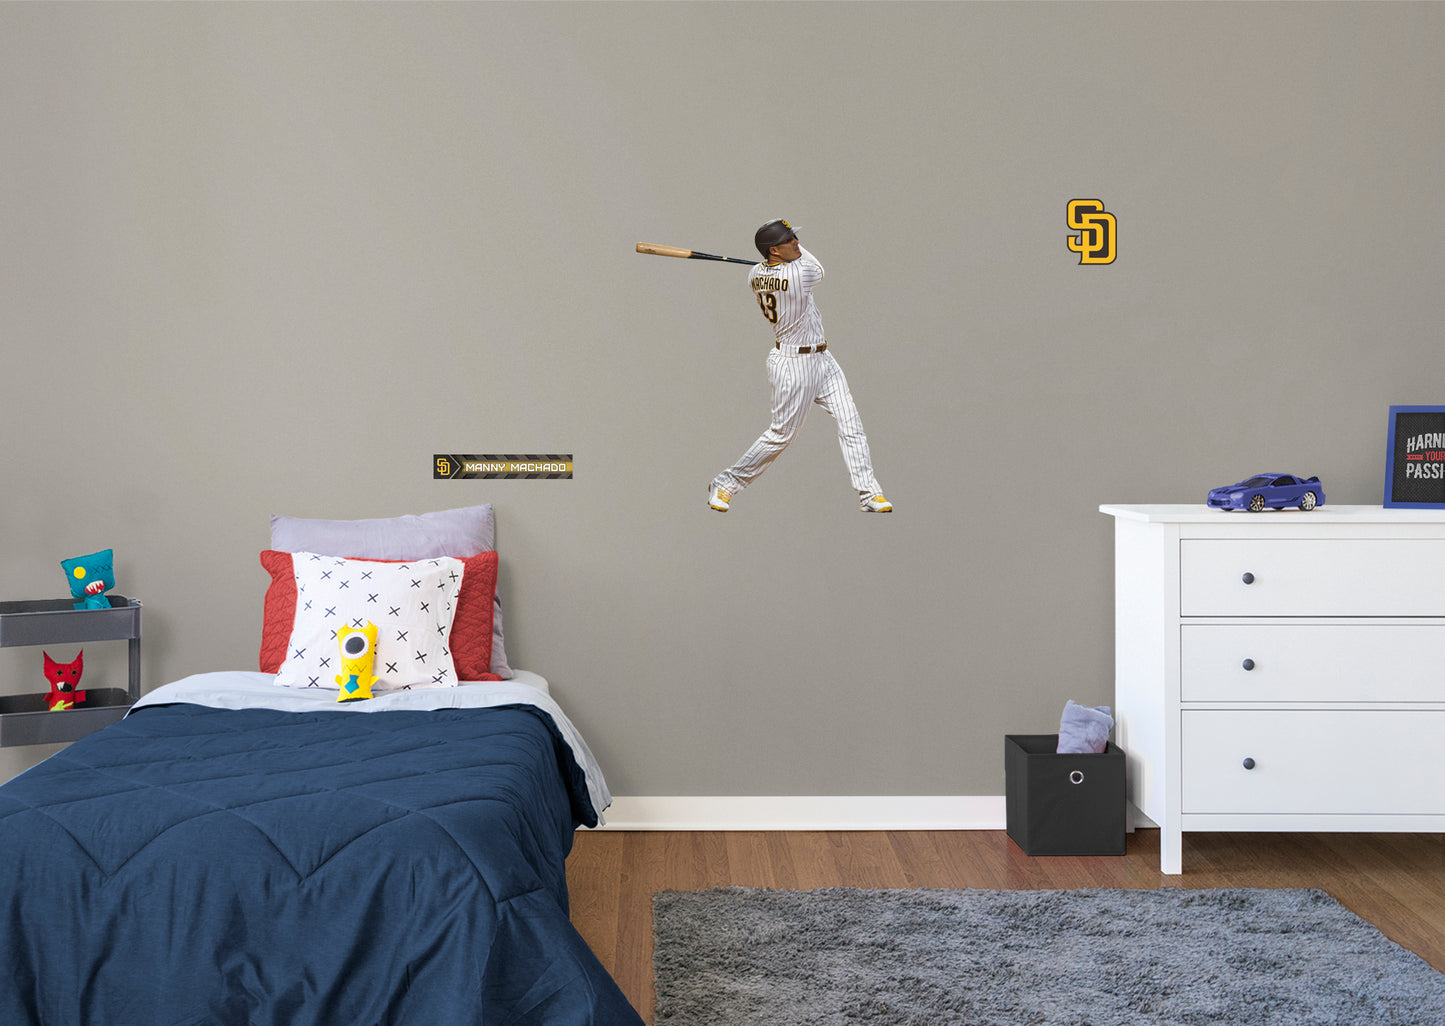 San Diego Padres: Manny Machado         - Officially Licensed MLB Removable Wall   Adhesive Decal